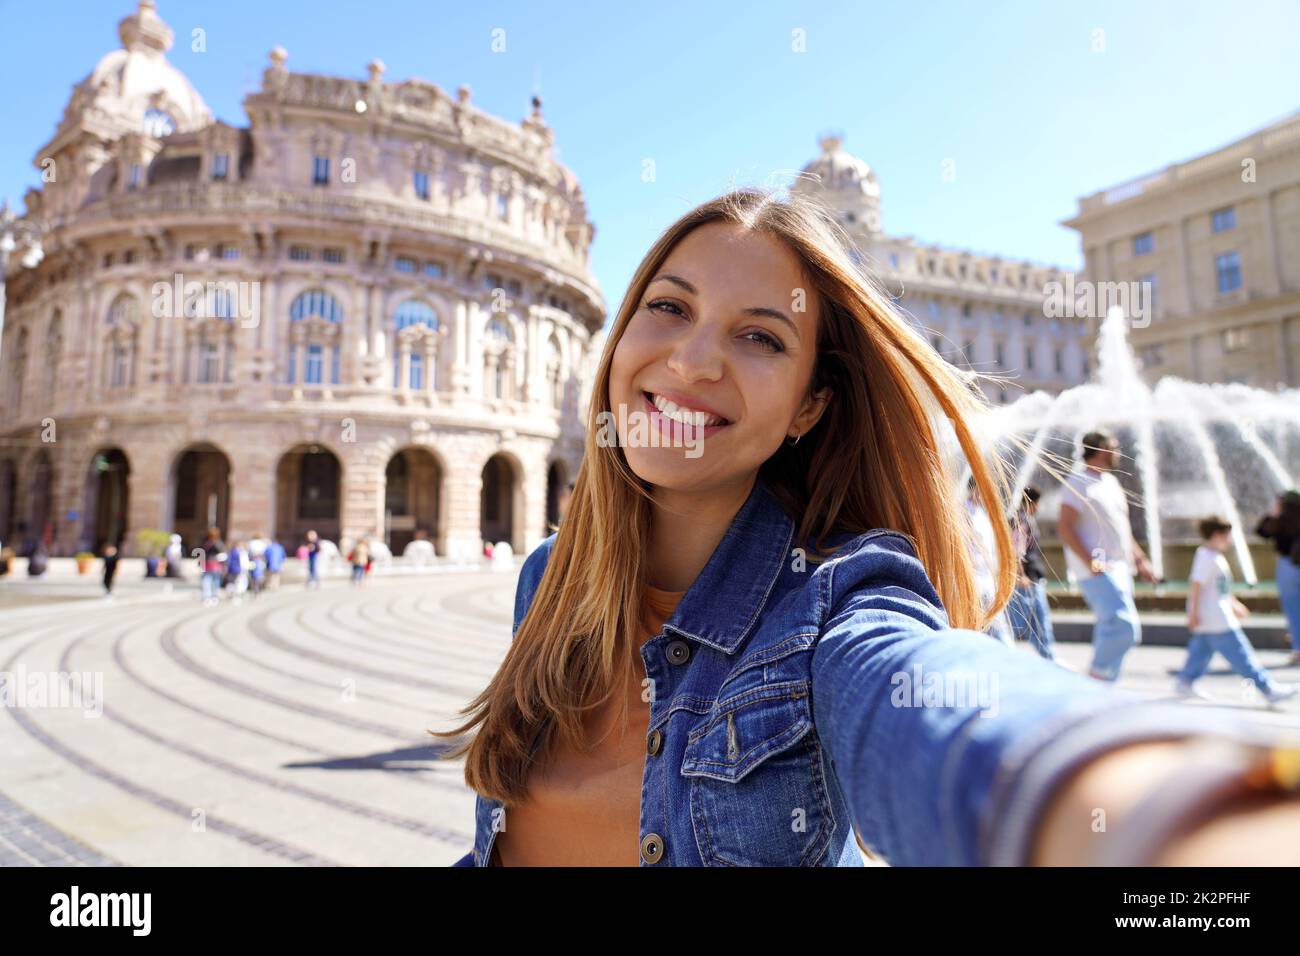 Traveling by Italy. Young traveling woman taking selfie at famous square in Genoa. Stock Photo